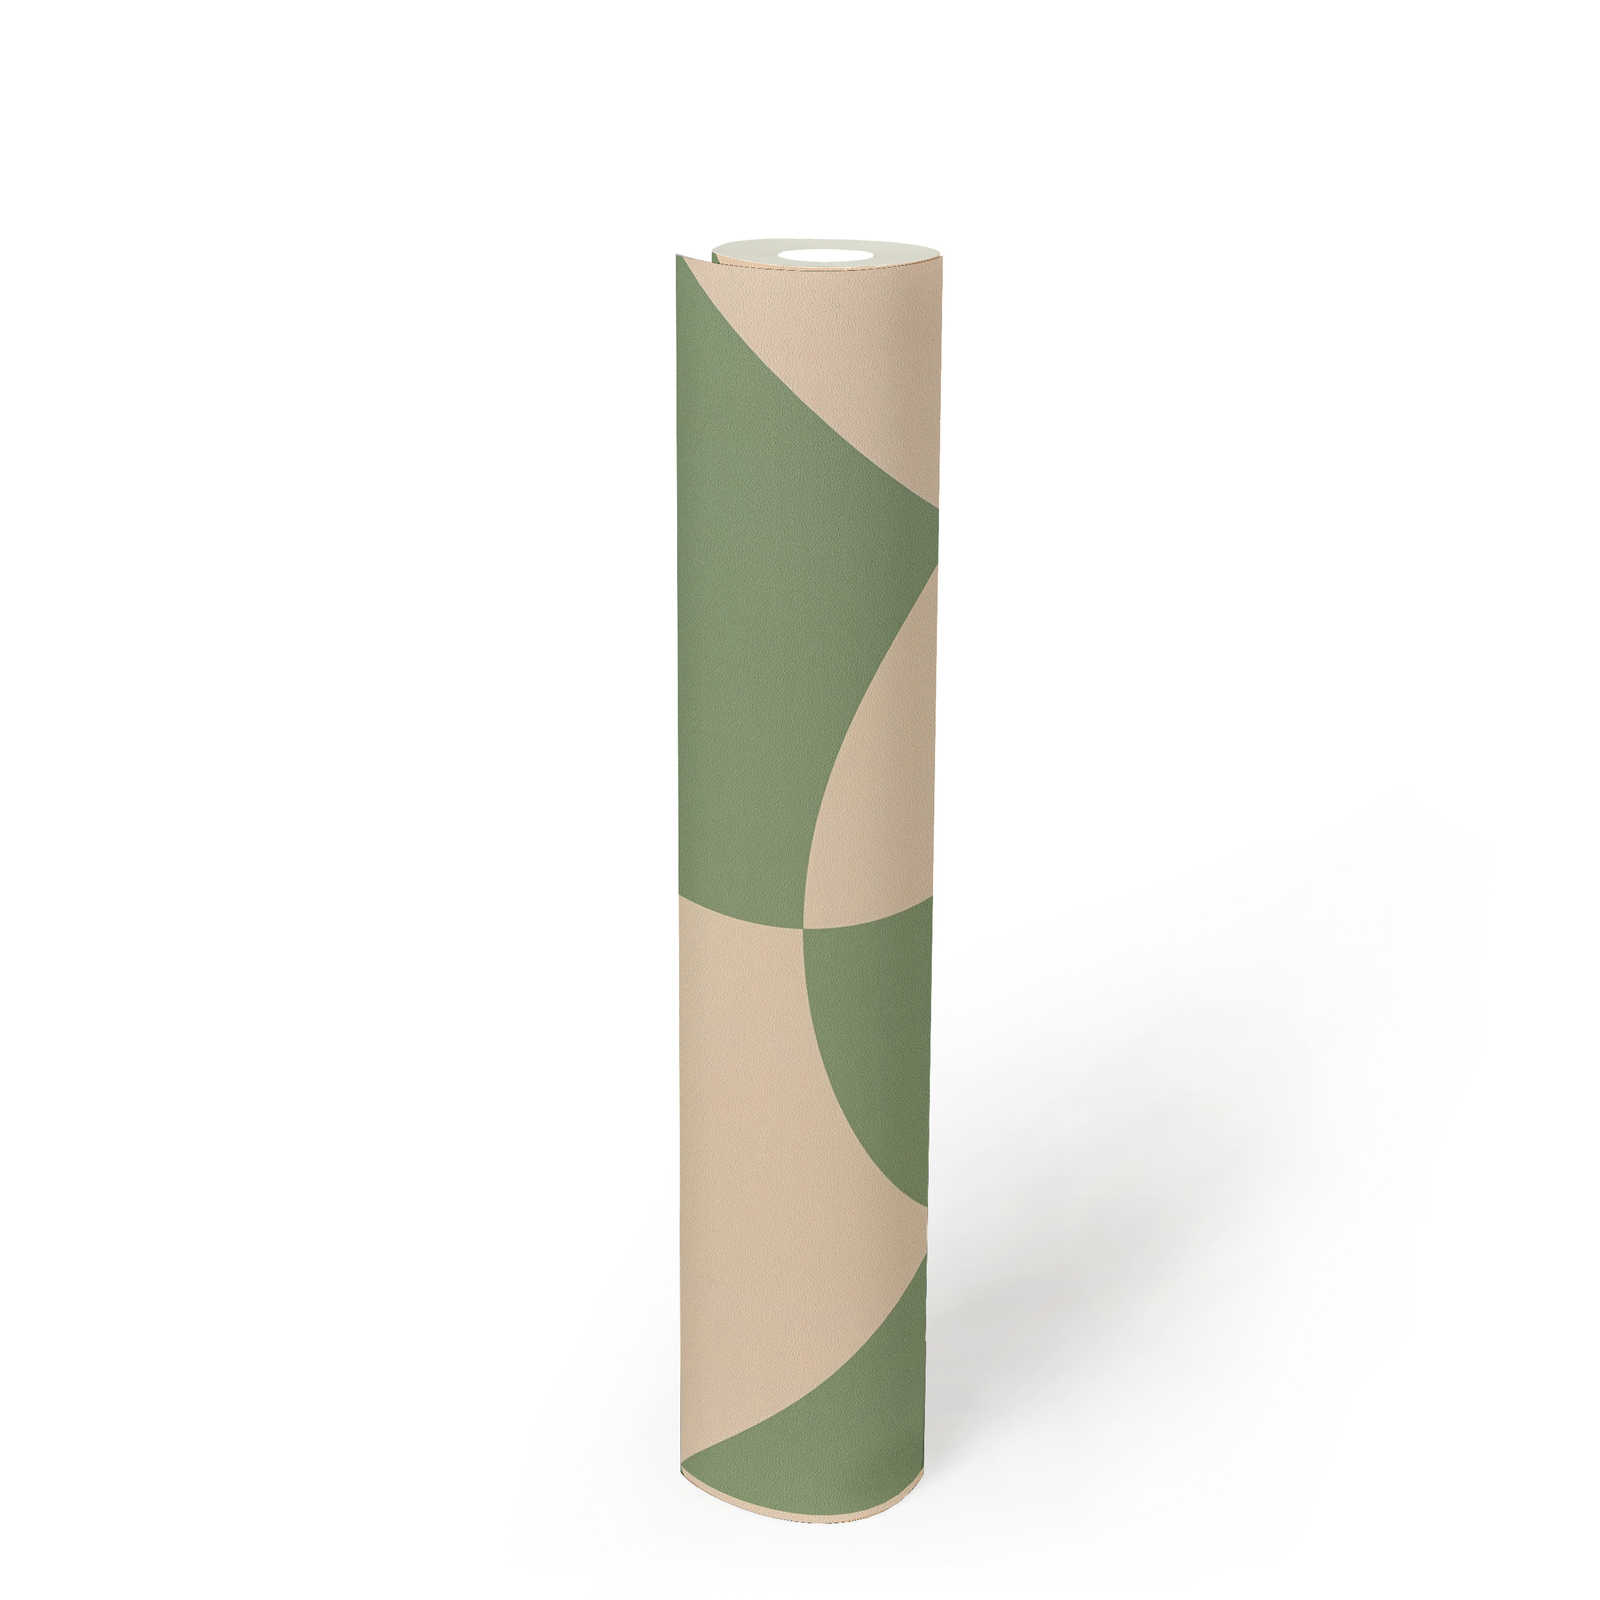             Non-woven wallpaper with circle pattern & geometric shapes - beige, green
        